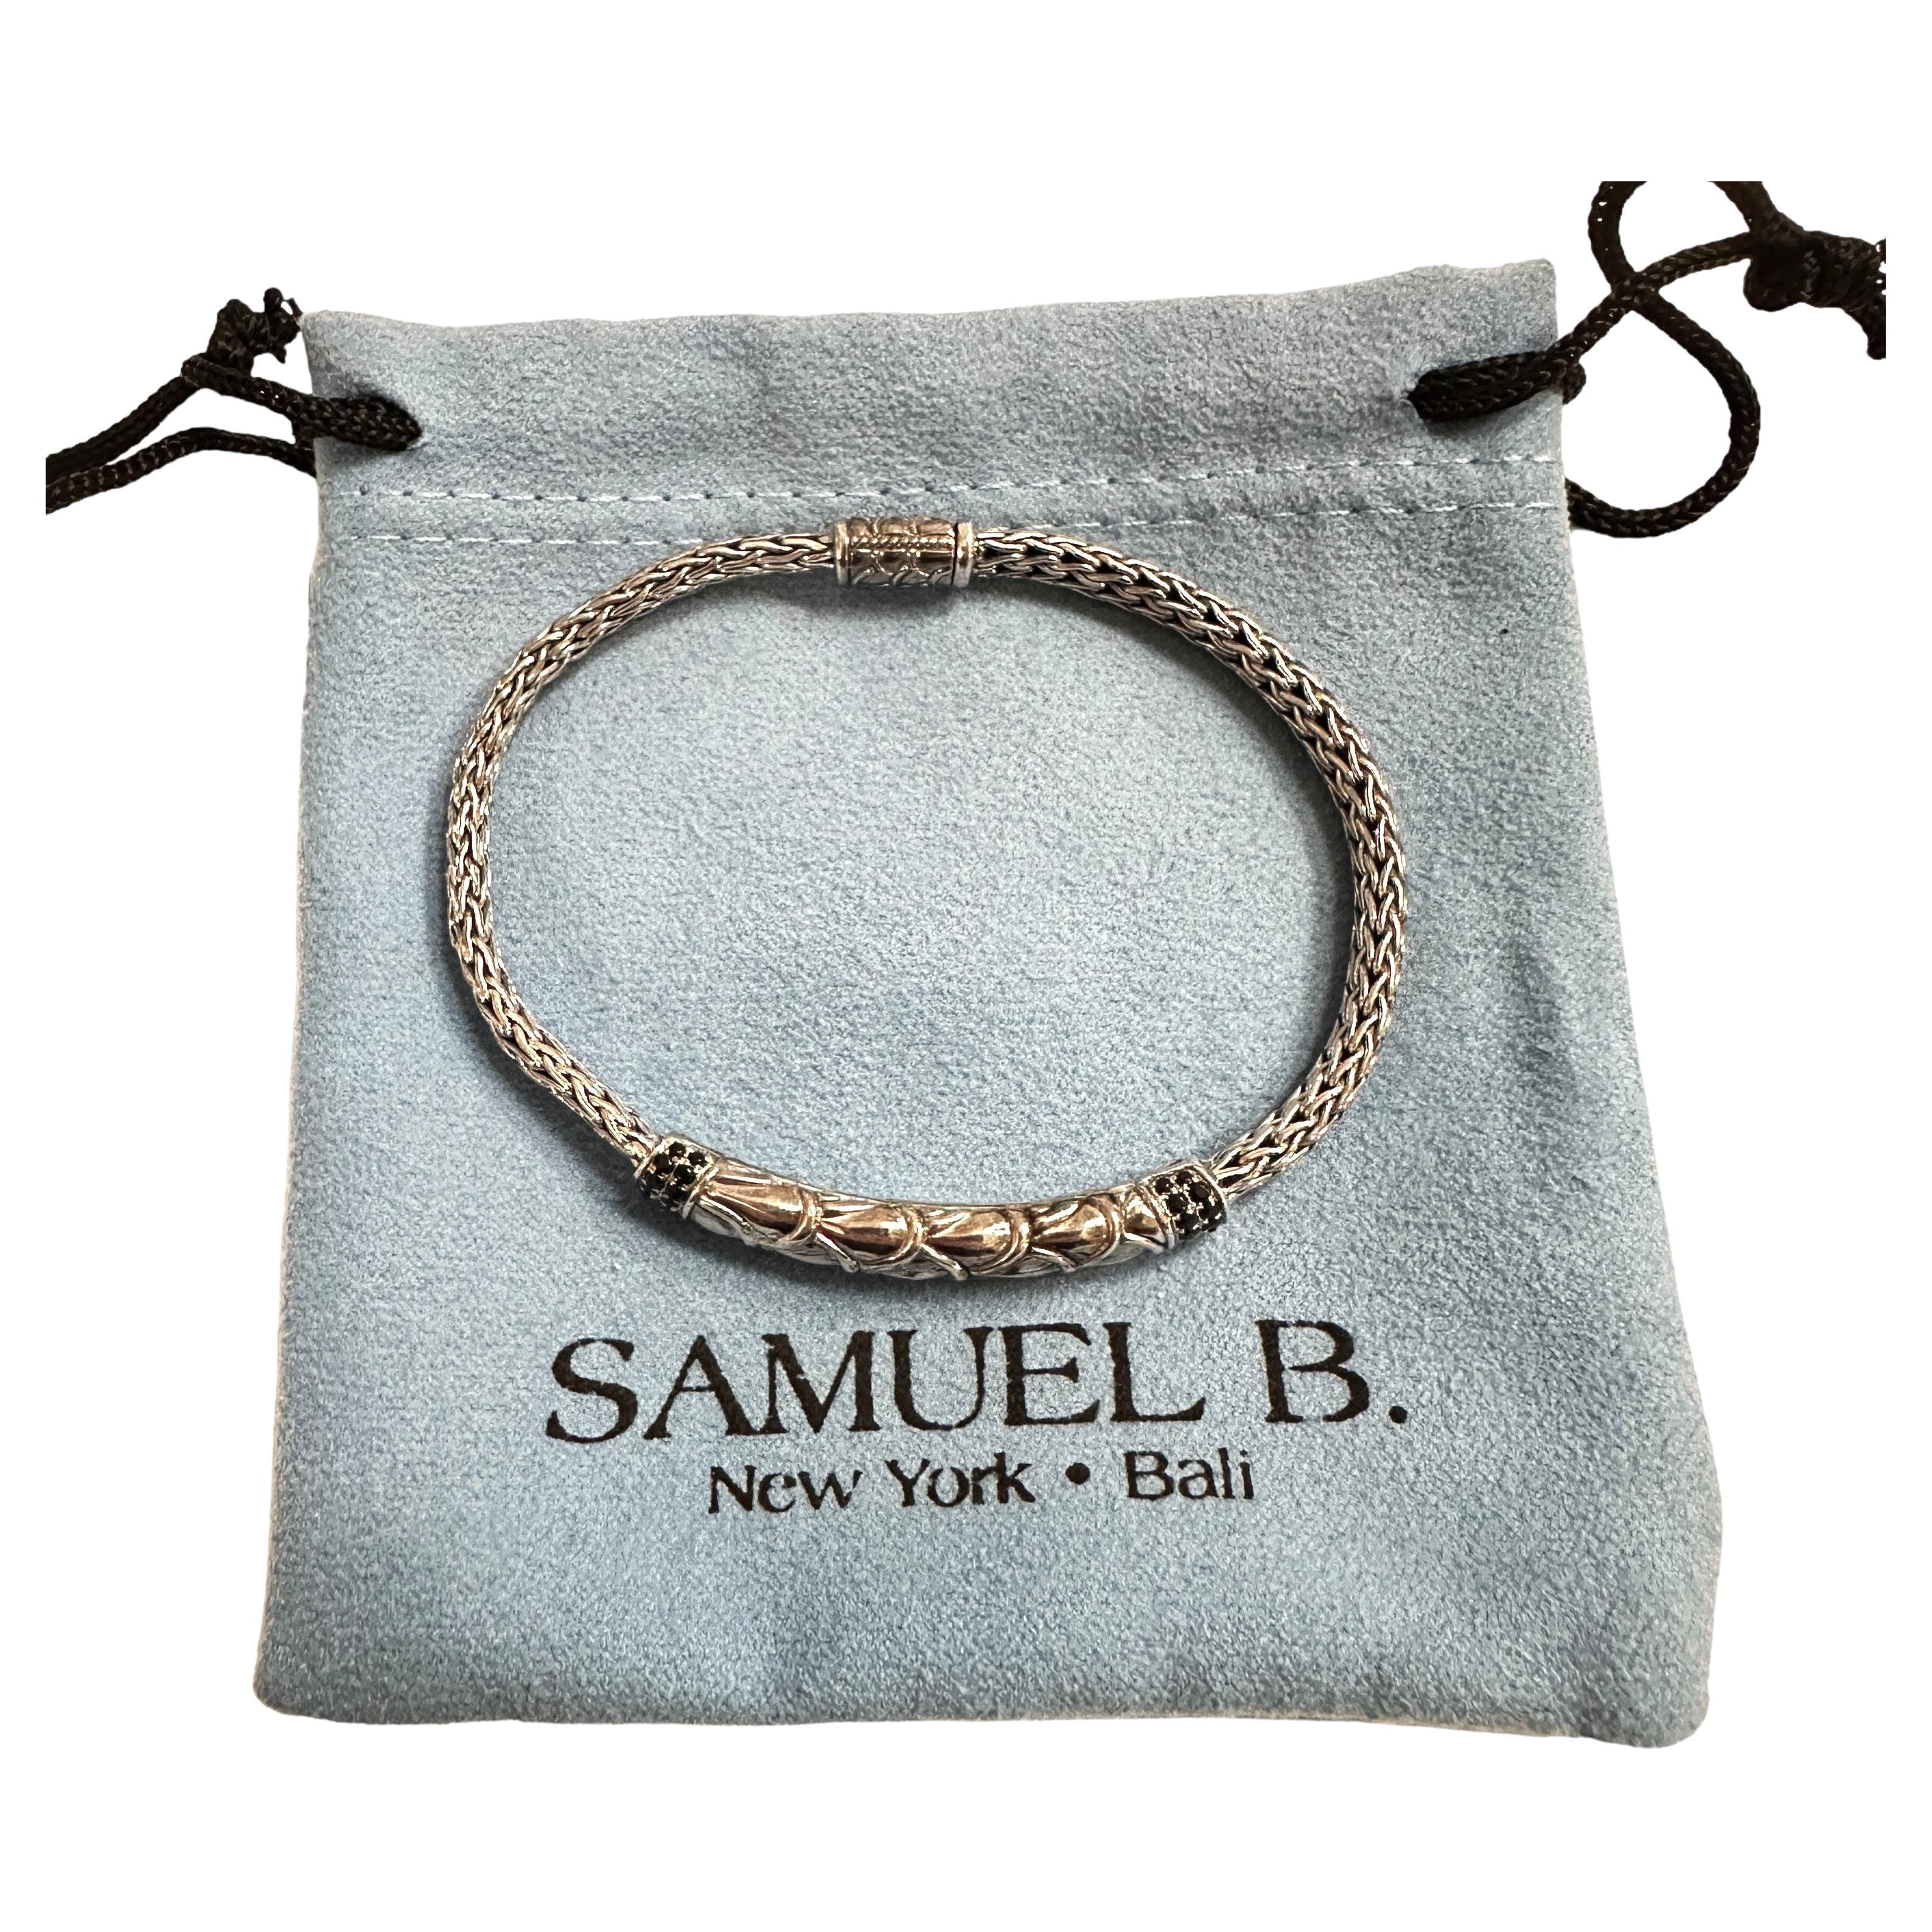 This is a pre-owned Samuel B, New York Sterling Silver Bracelet.  It comes with a blue duster bag.  The bracelet is 7.5 inches long and the mesh chain is 4.8 mm wide.  It's in excellent condition. This bracelet will surely get noticed.  It's truly